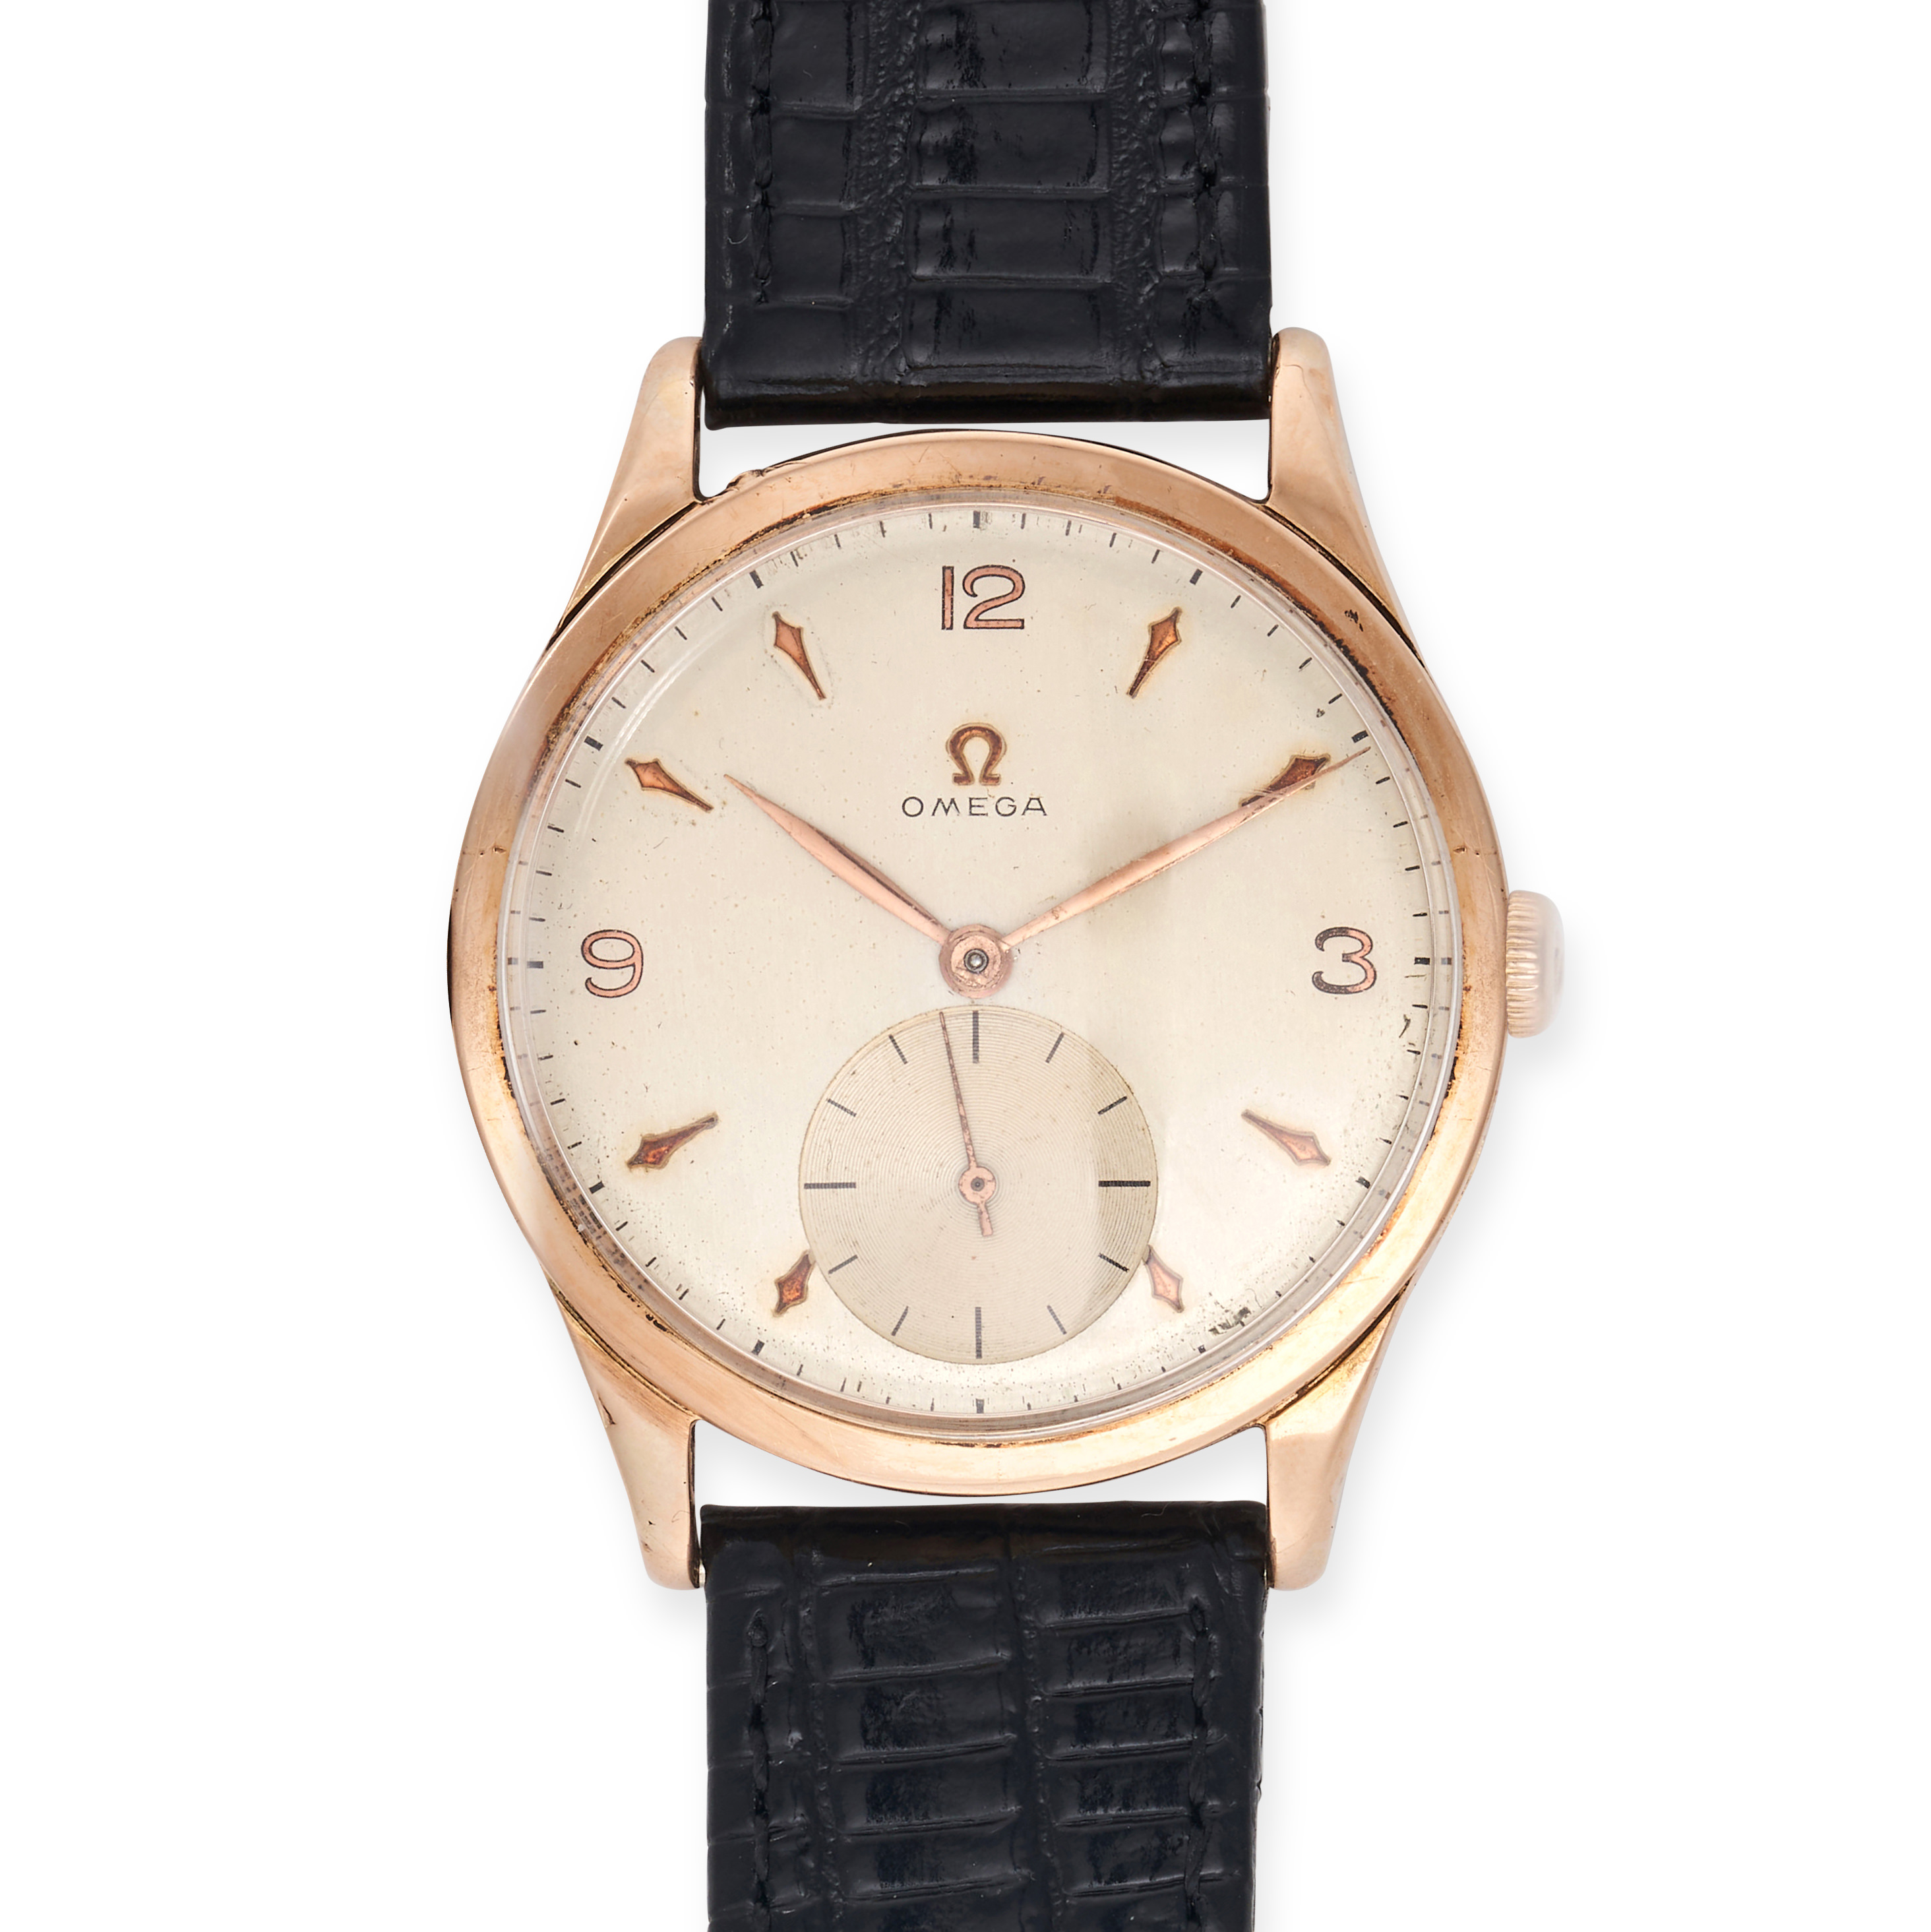 OMEGA - A VINTAGE OMEGA OVERSIZED WRISTWATCH in 18ct pink gold, manual wind 15 jewel movement, ca...